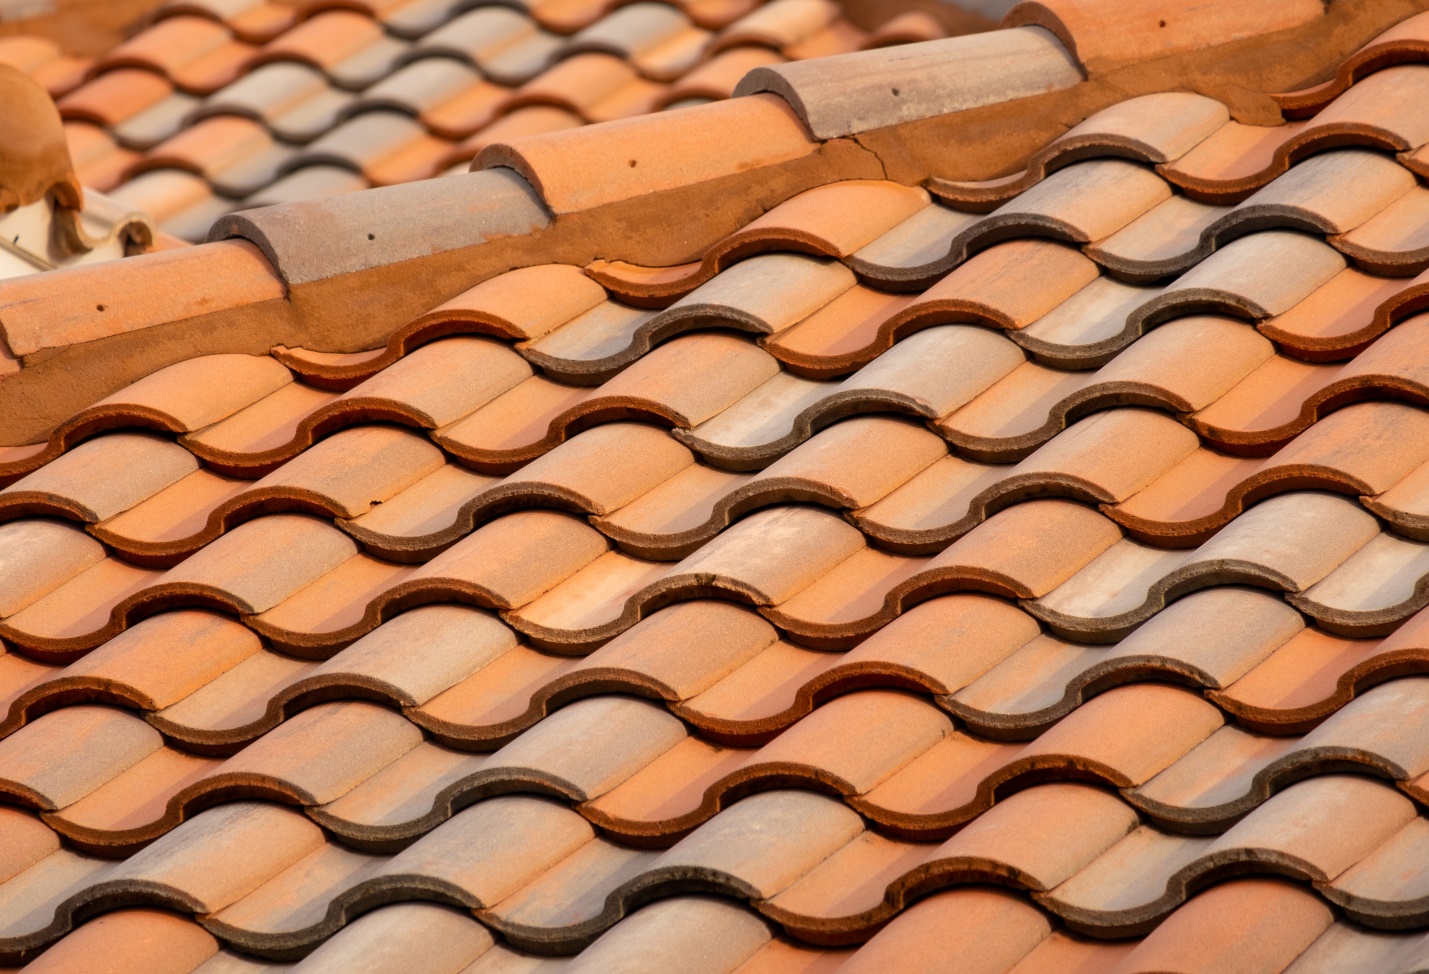 Discolored asphalt shingles can be replaced through roofing services in Burbank